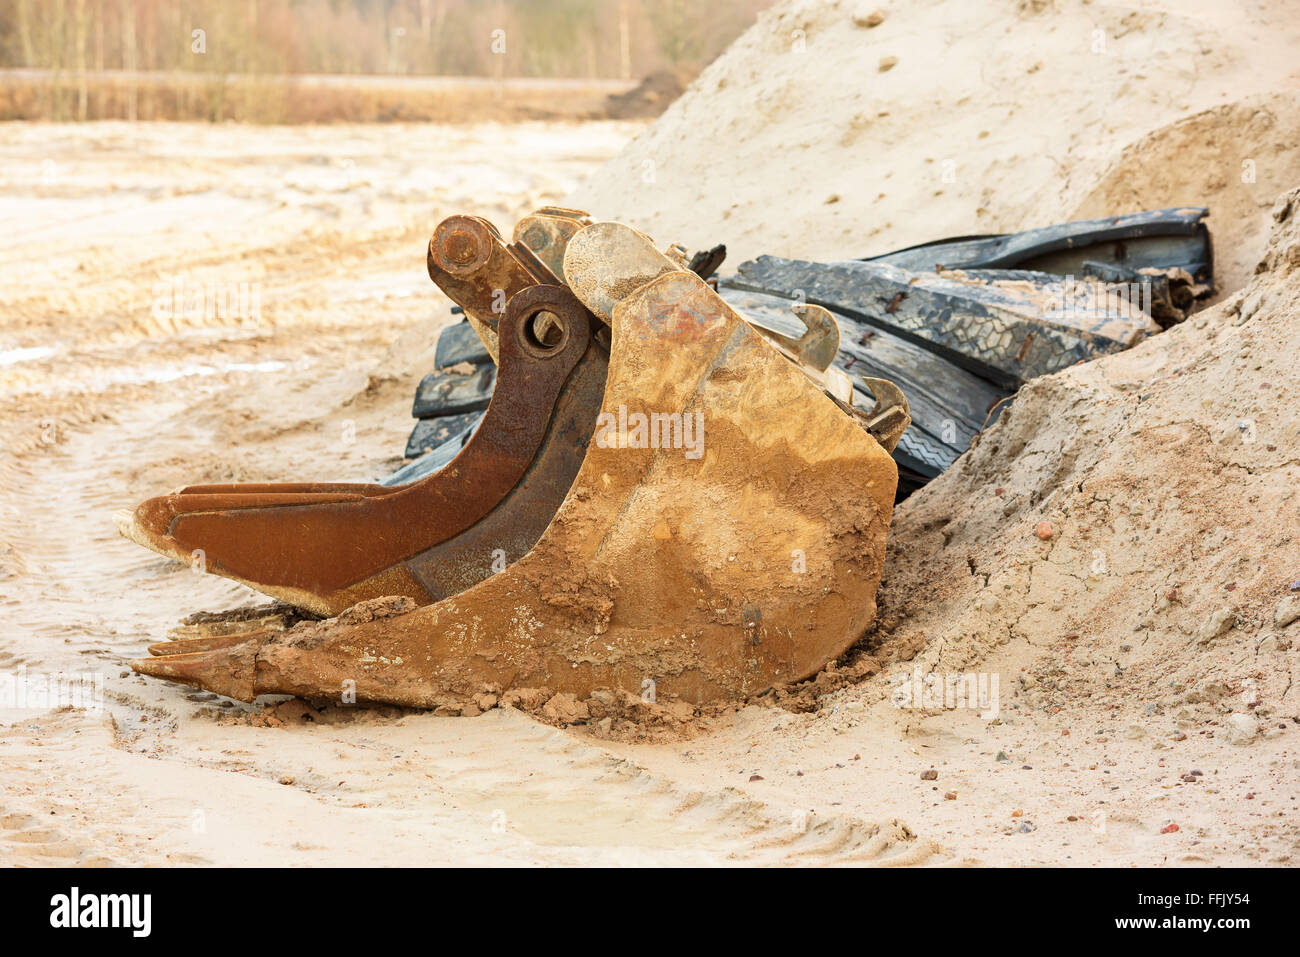 Two excavator scoops, one inside the other, at a sandy and muddy construction site. Stock Photo